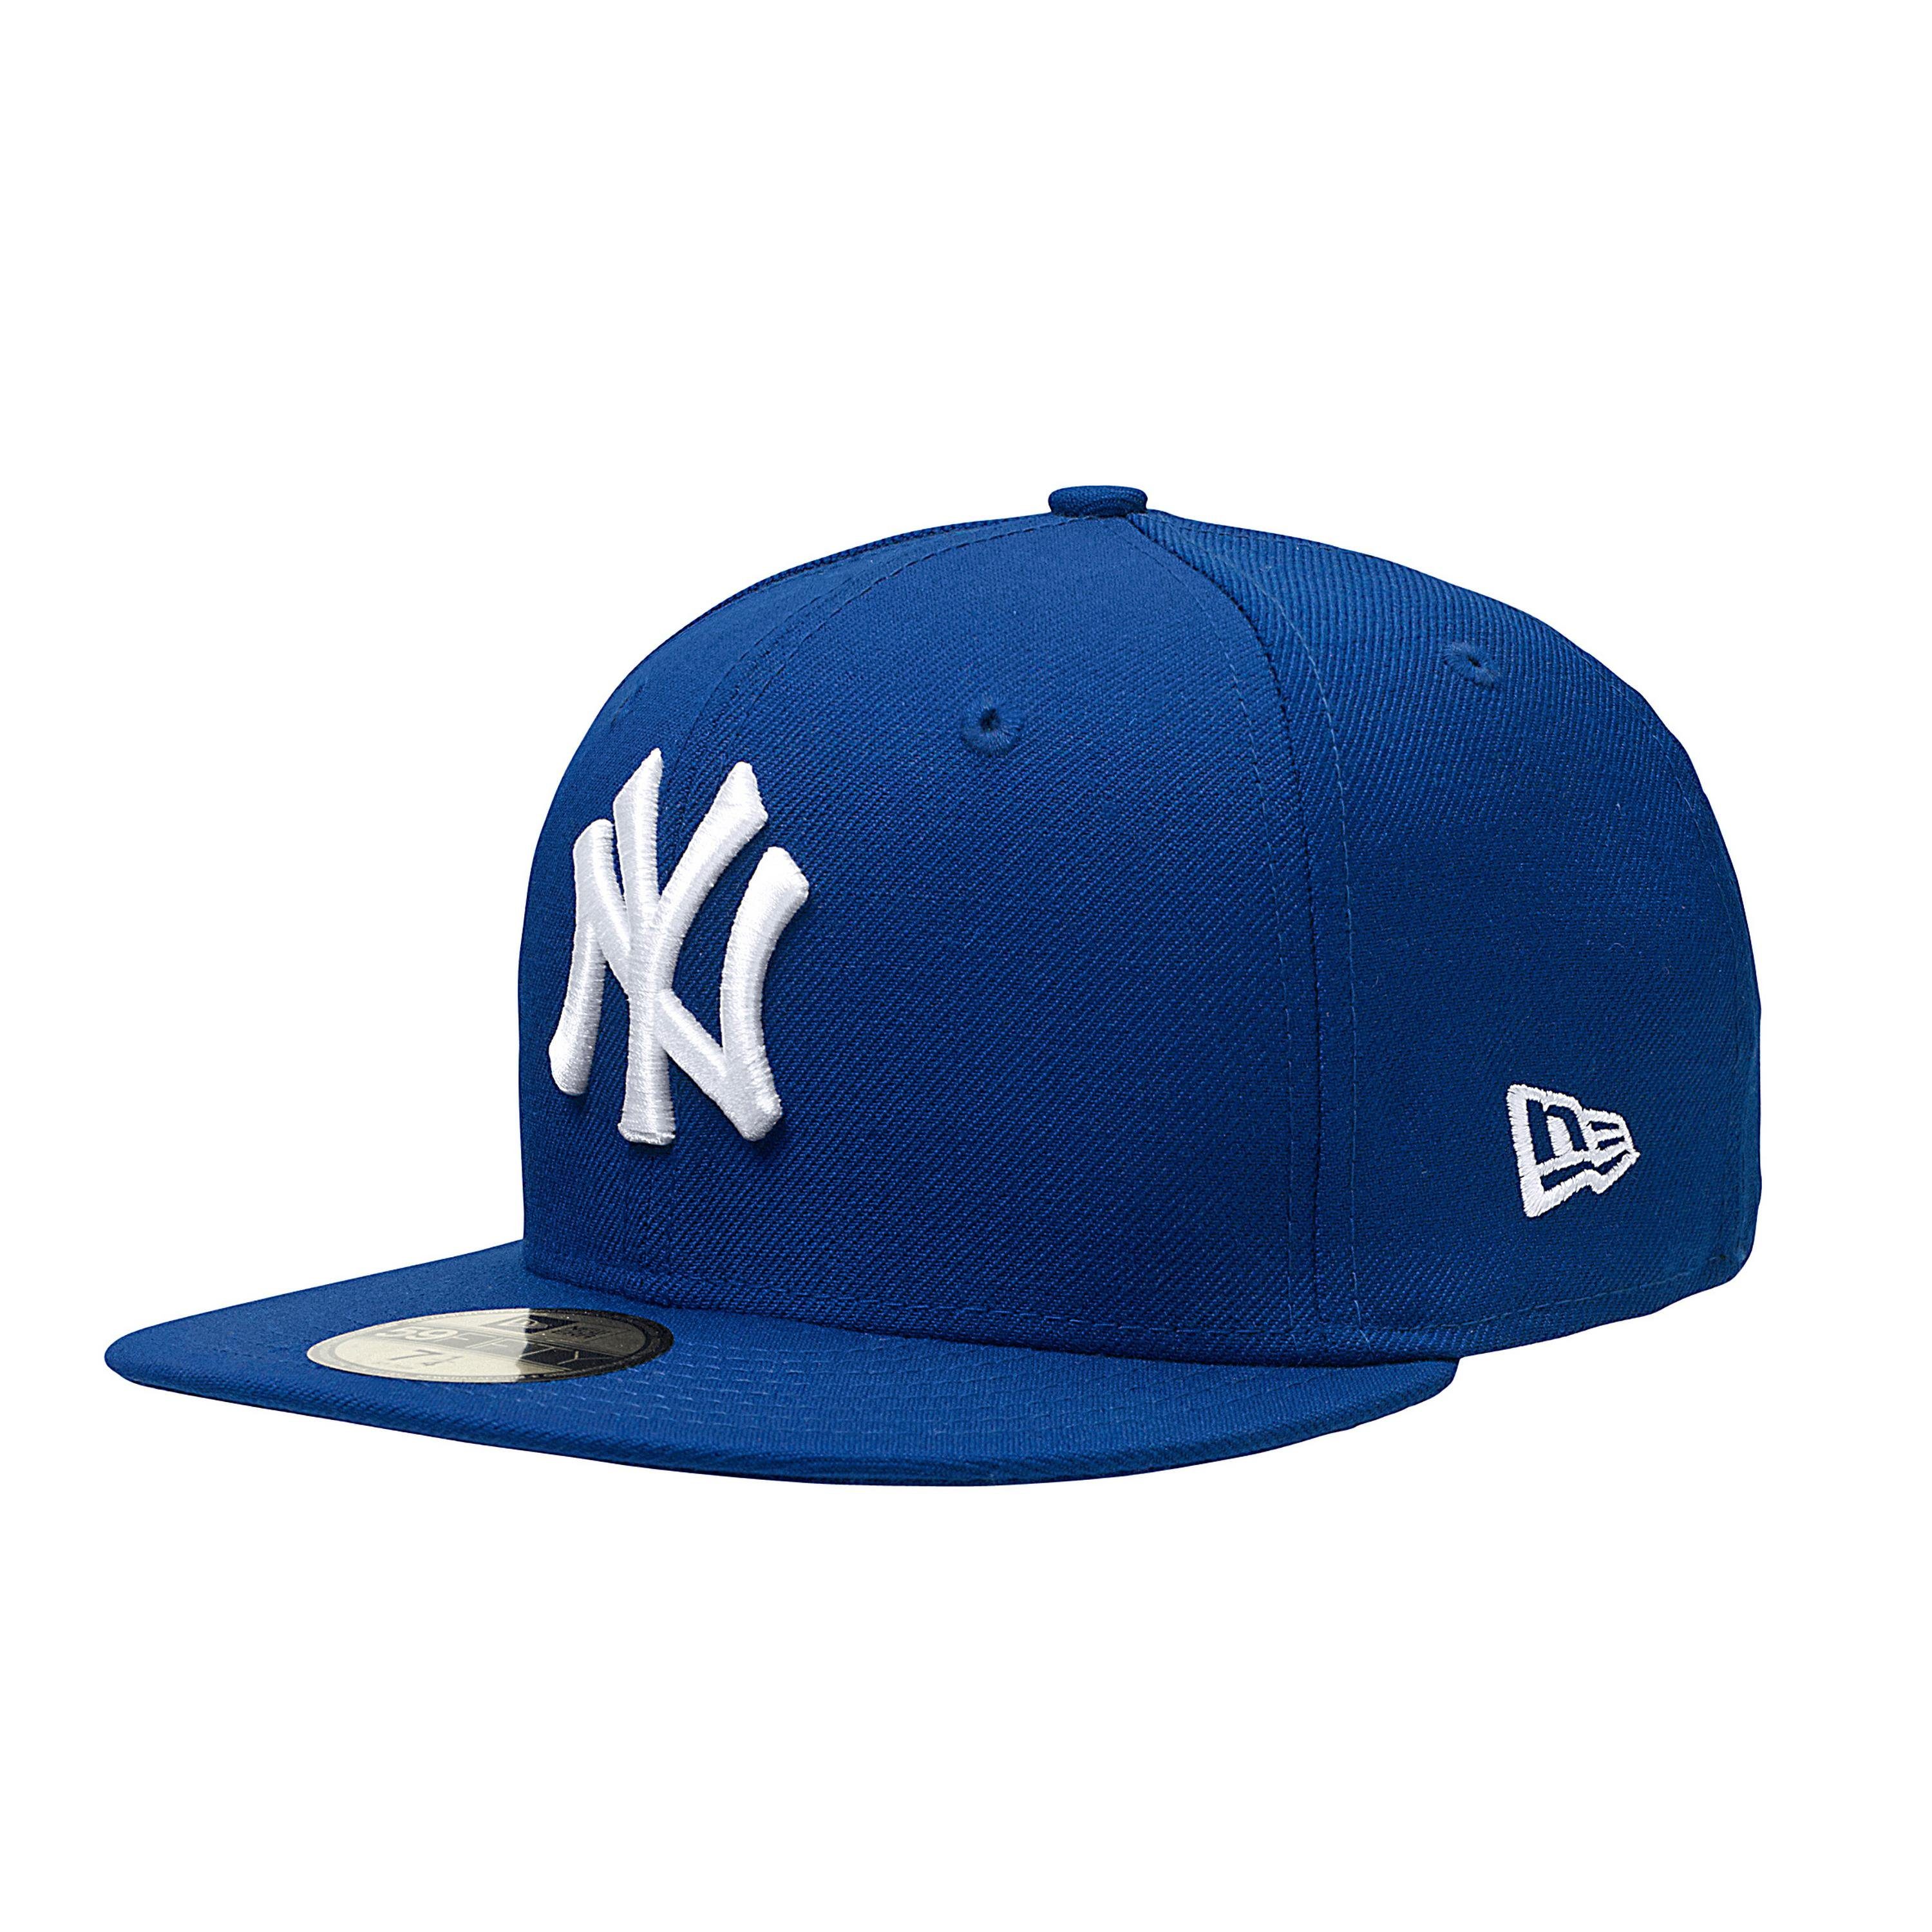 Cap New Era Fitted New 59Fifty charcoal Yankees York